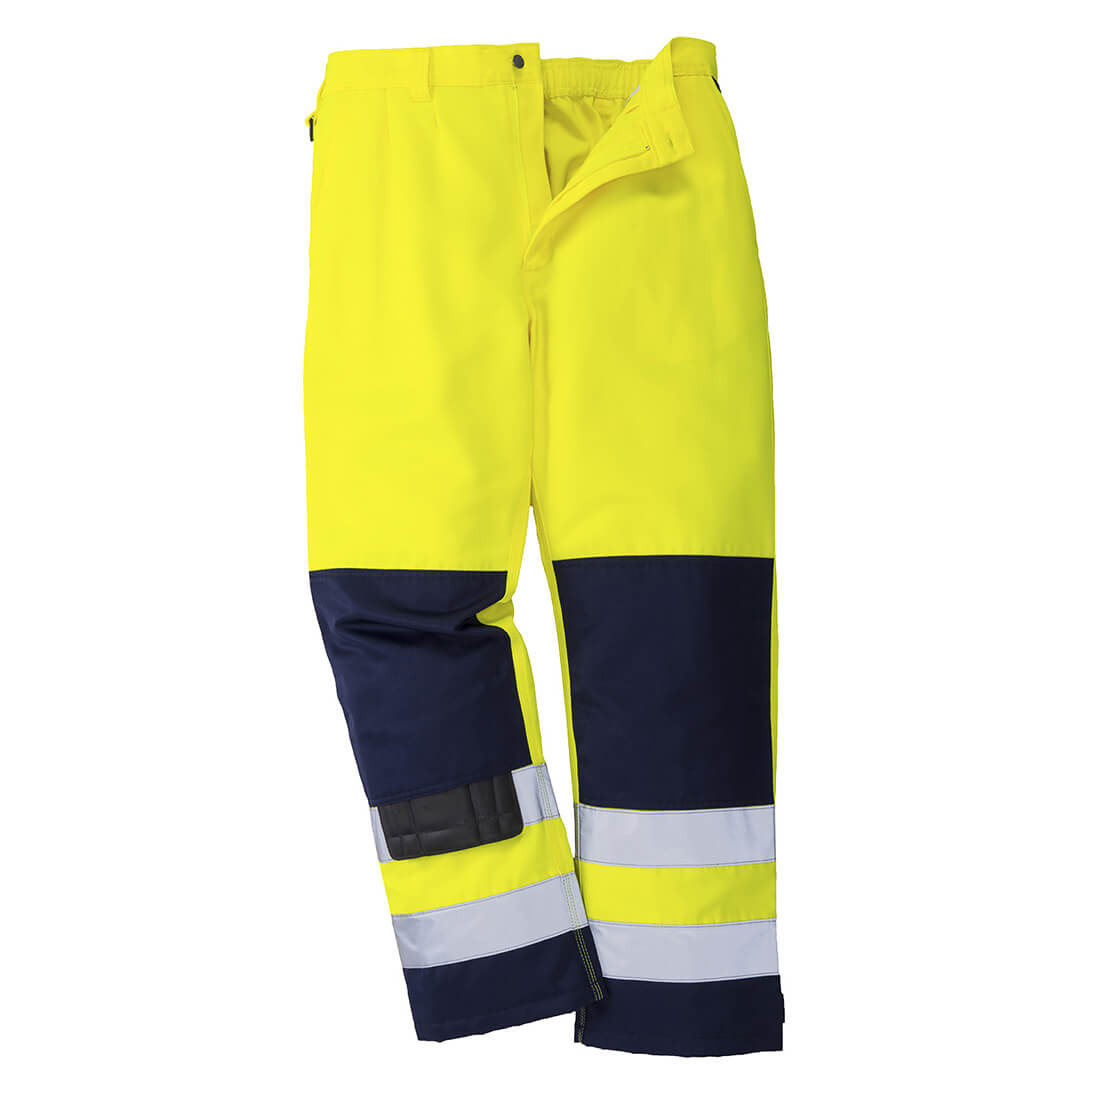 Photo of Portwest Seville Hi Vis Work Trousers Yellow / Navy 2xl